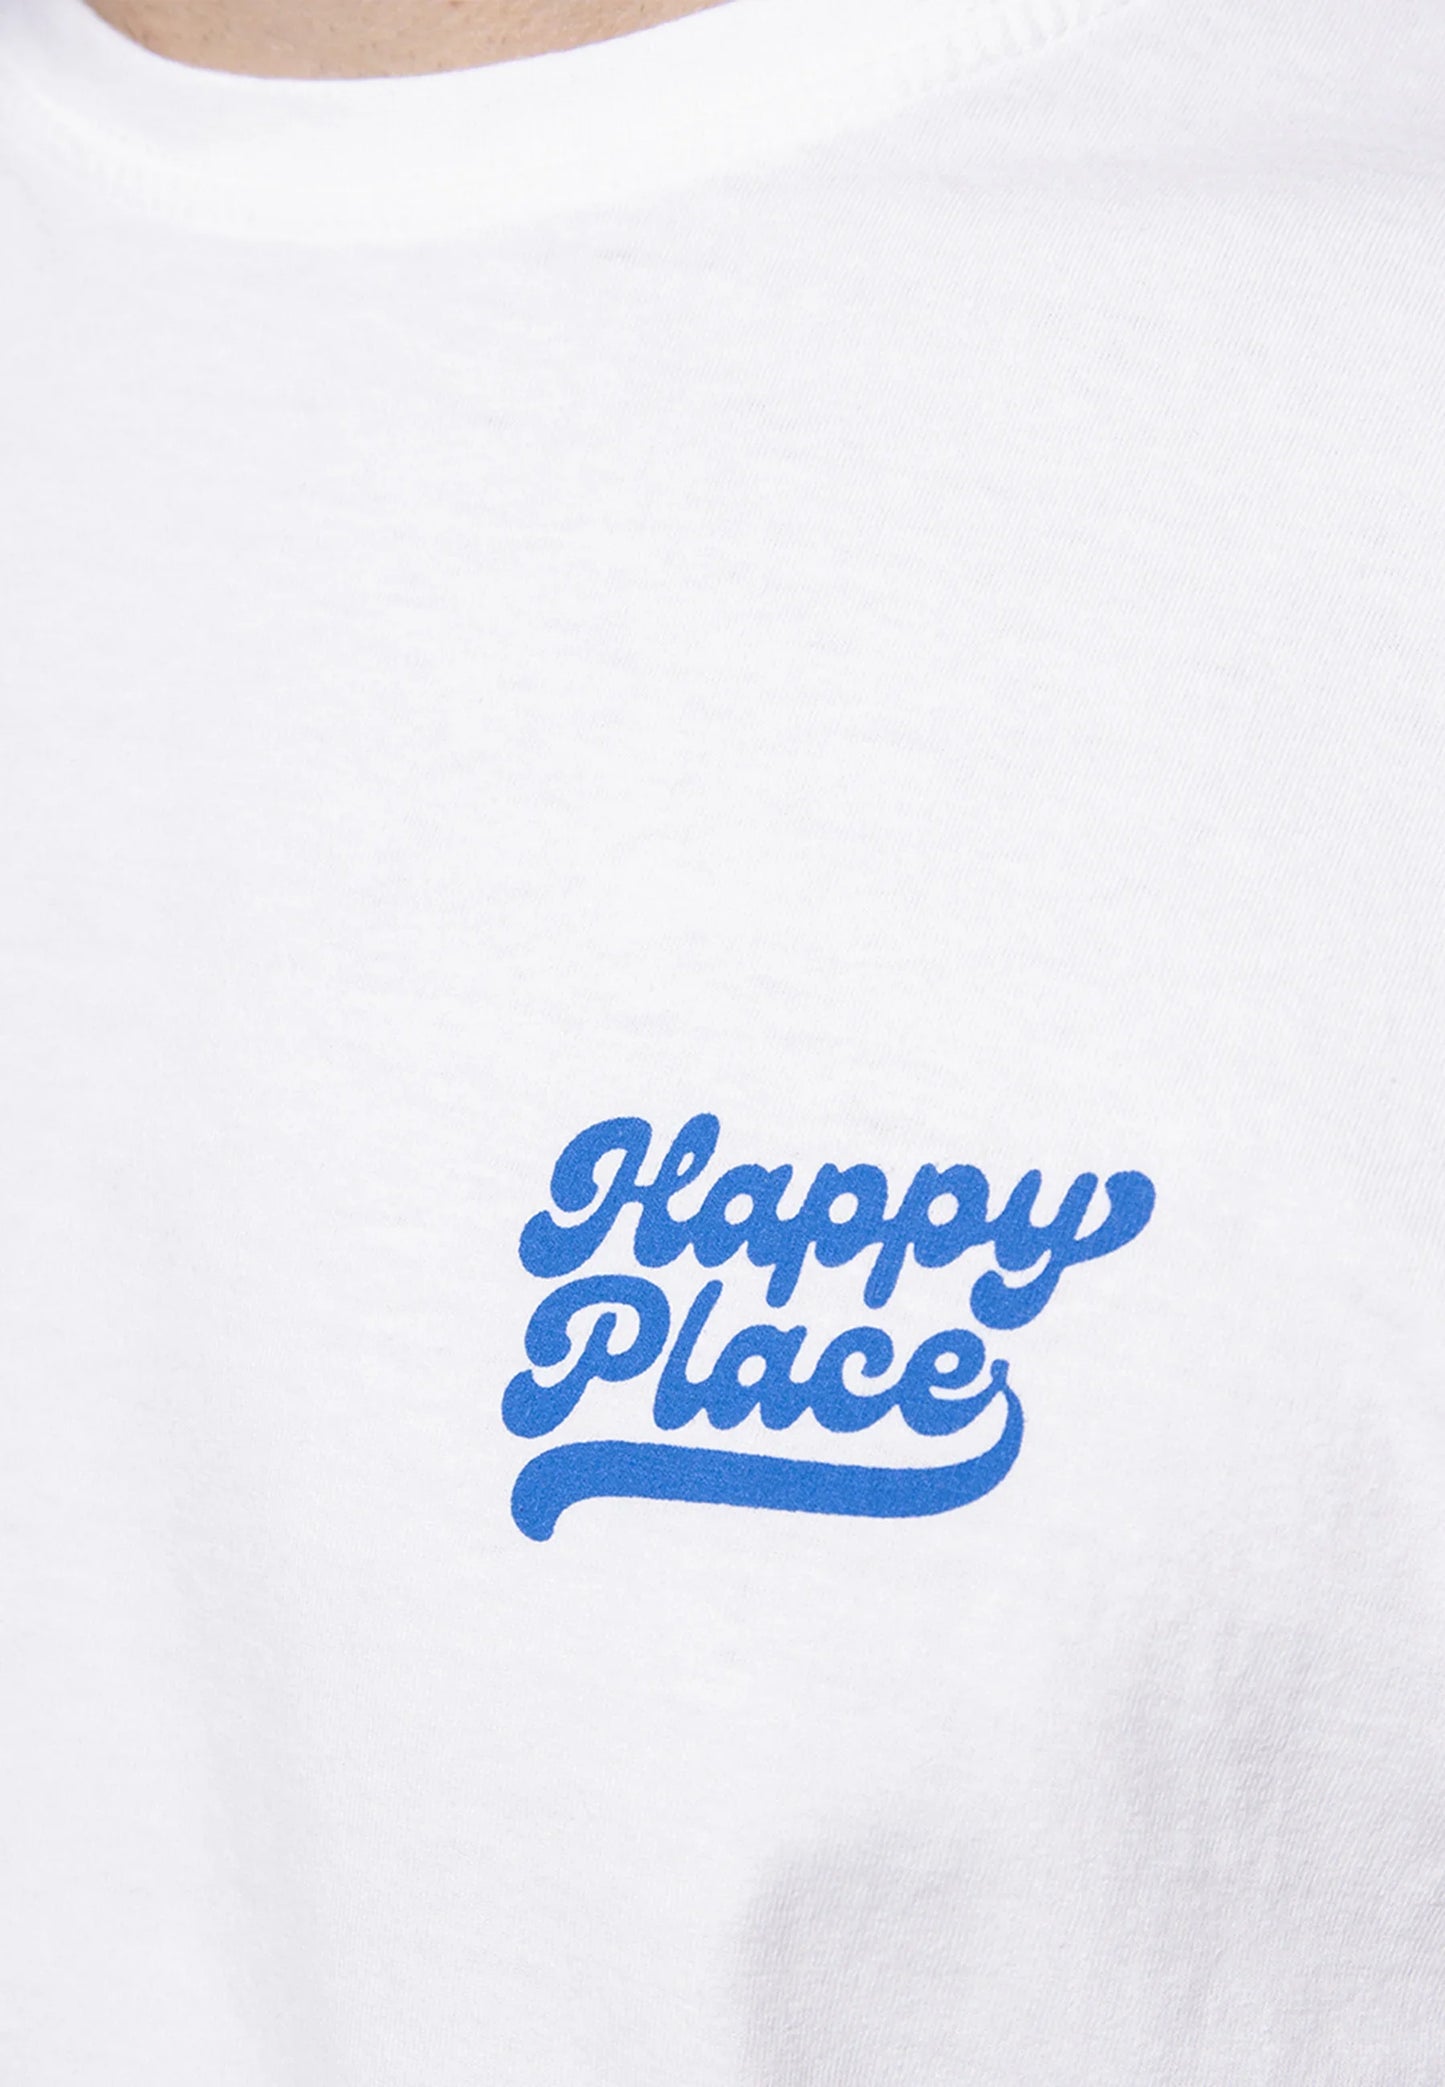 T-Shirt Washed Happy Place - Coton